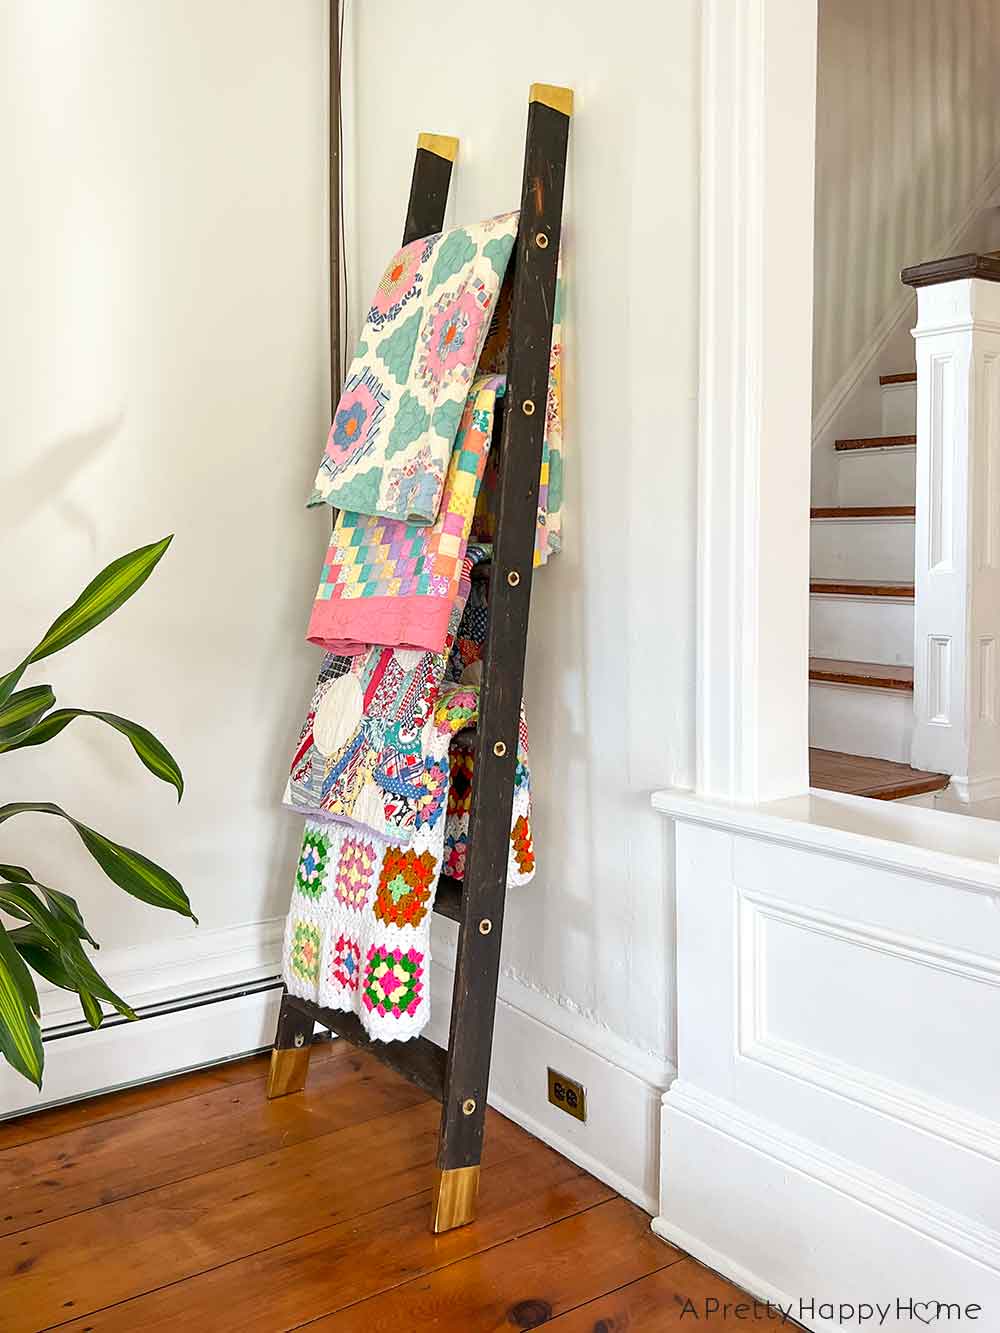 Turn An Old Wood Ladder Into A Blanket Ladder by removing the top cap and adding brass leg tips